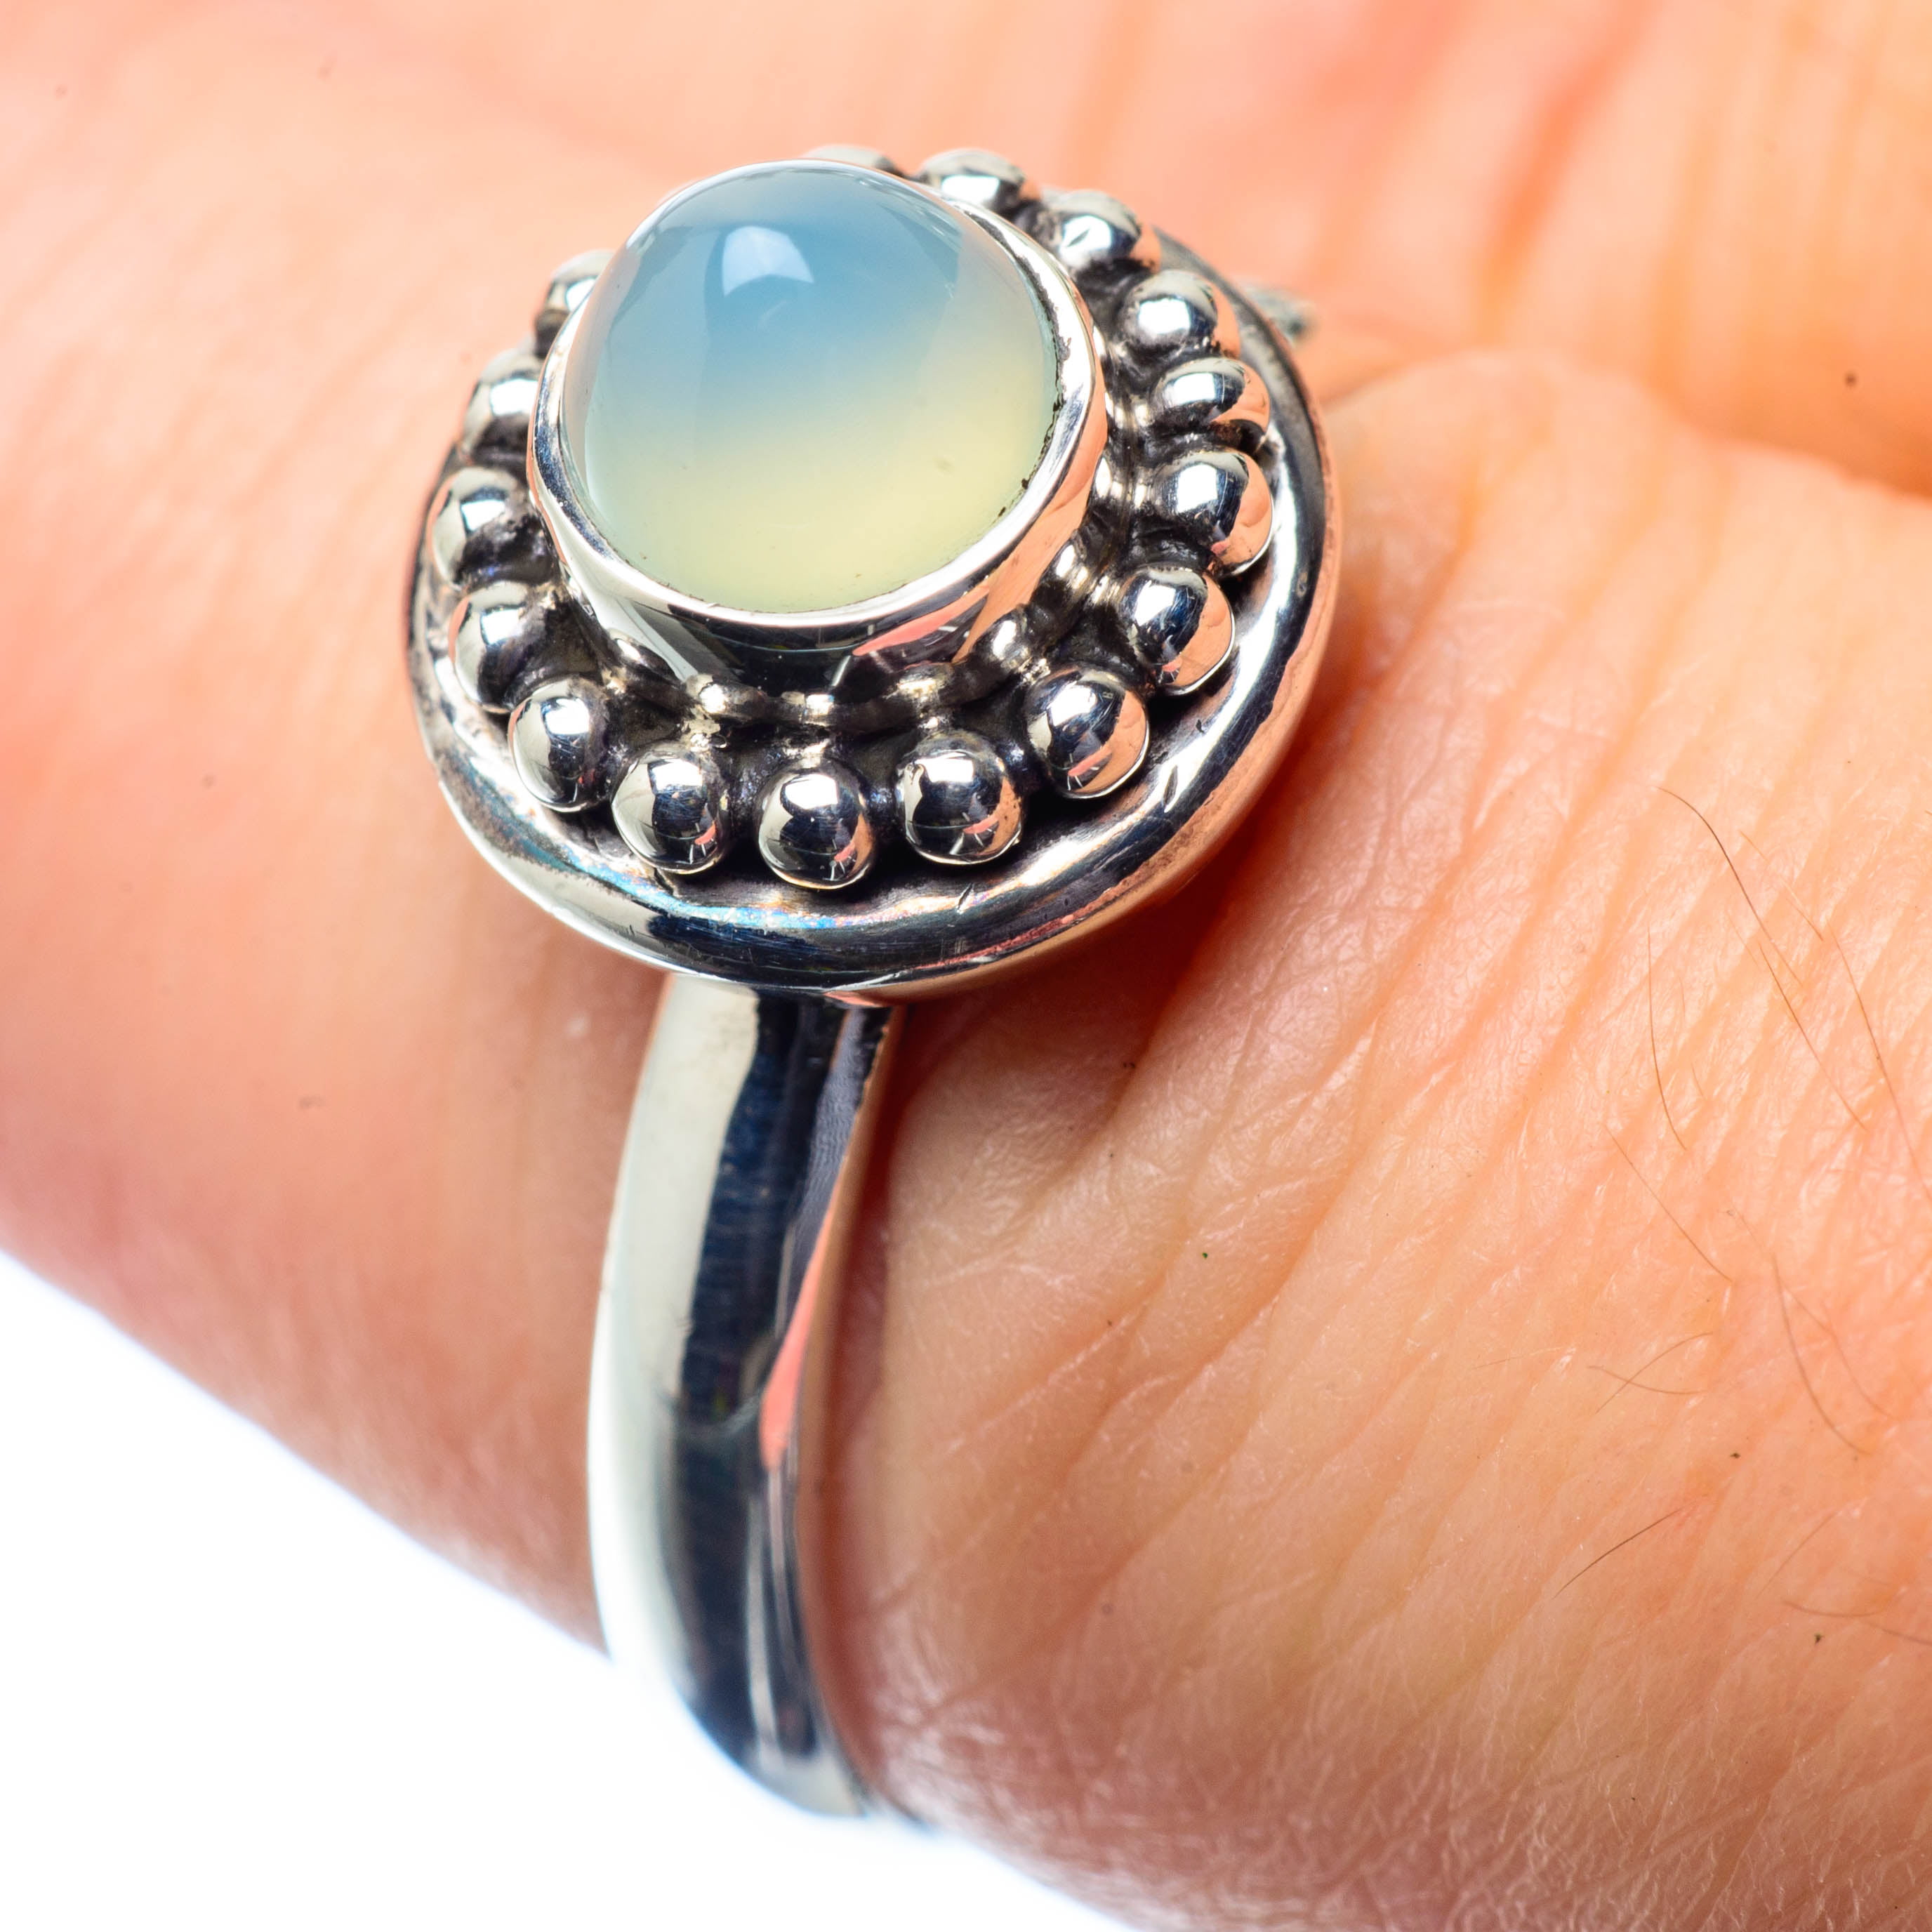 Handmade Moonstone and Sterling Silver shadow box ring.